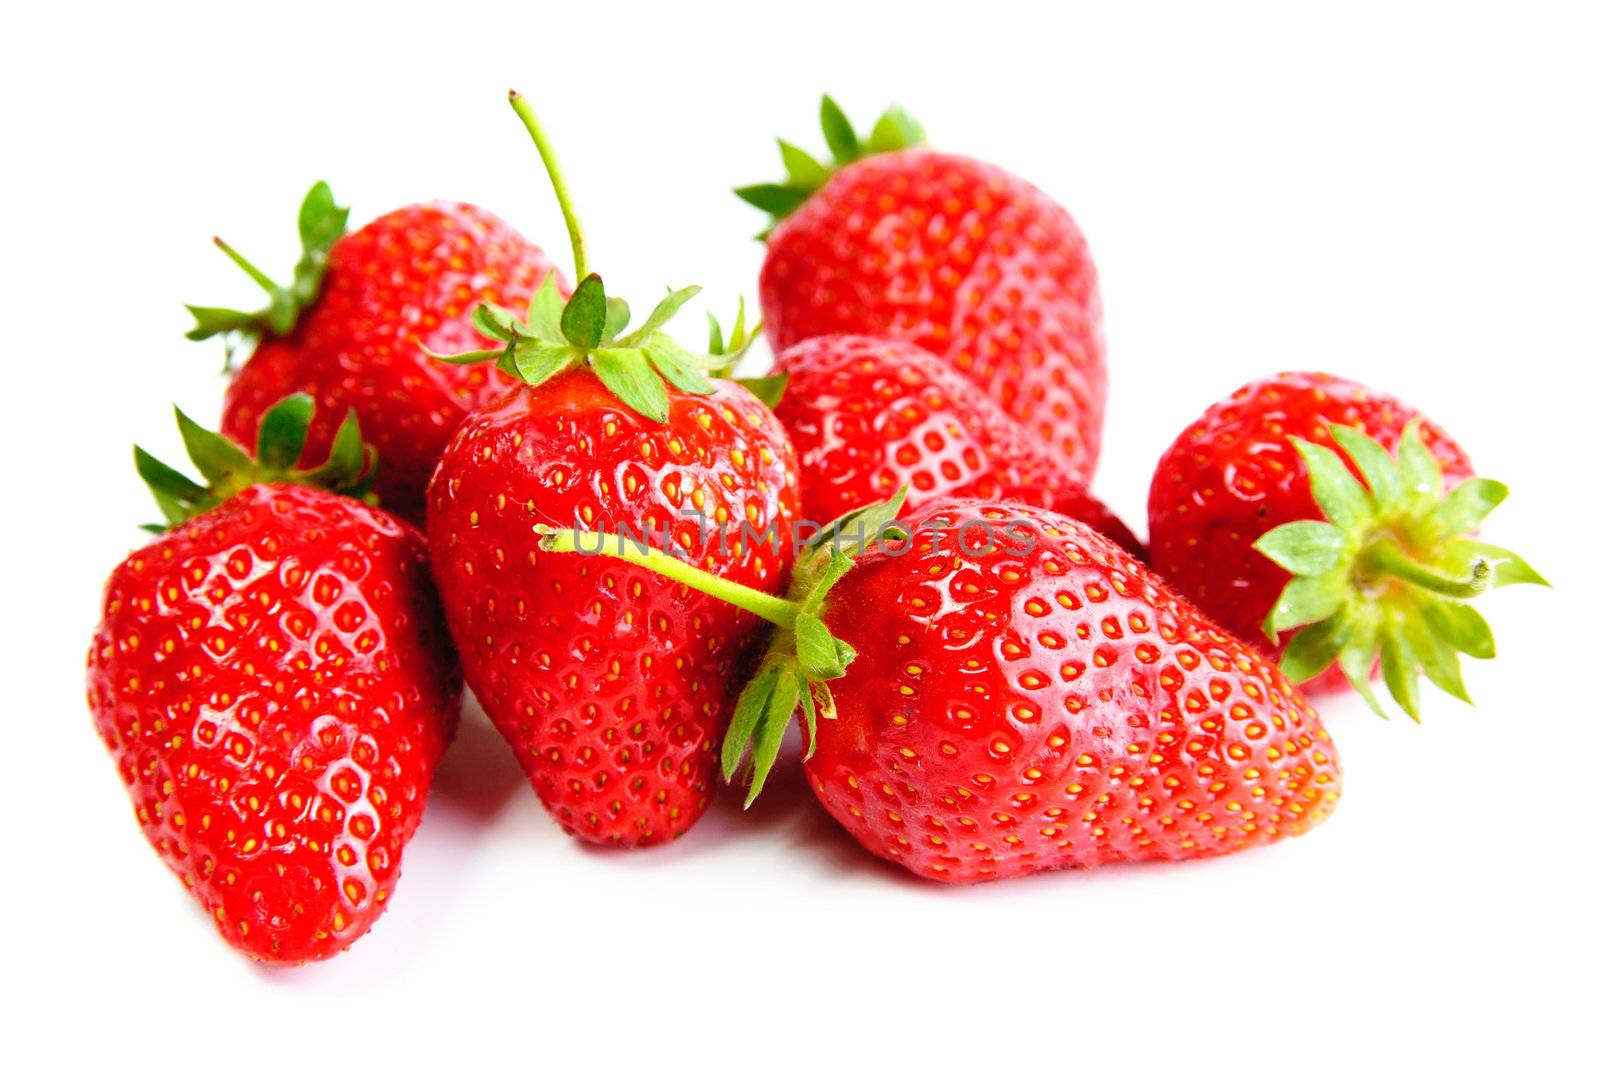 A bright red strawberries on white background